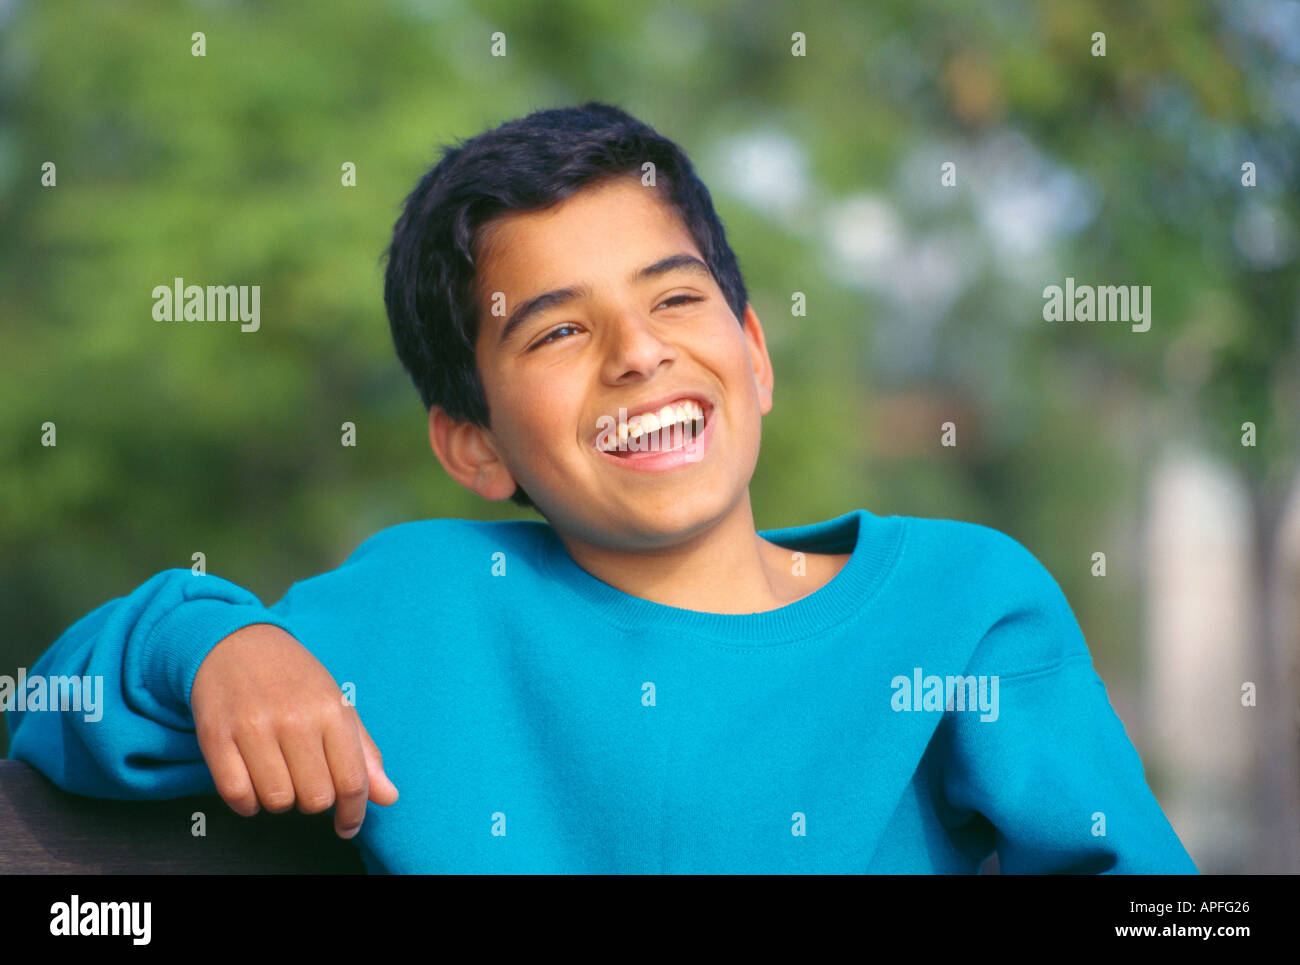 young person people Healthy Happy Hispanic 13 -14 year old  teen sitting outside outdoor outdoors in park. children having fun POV MR ©Myrleen Pearson Stock Photo